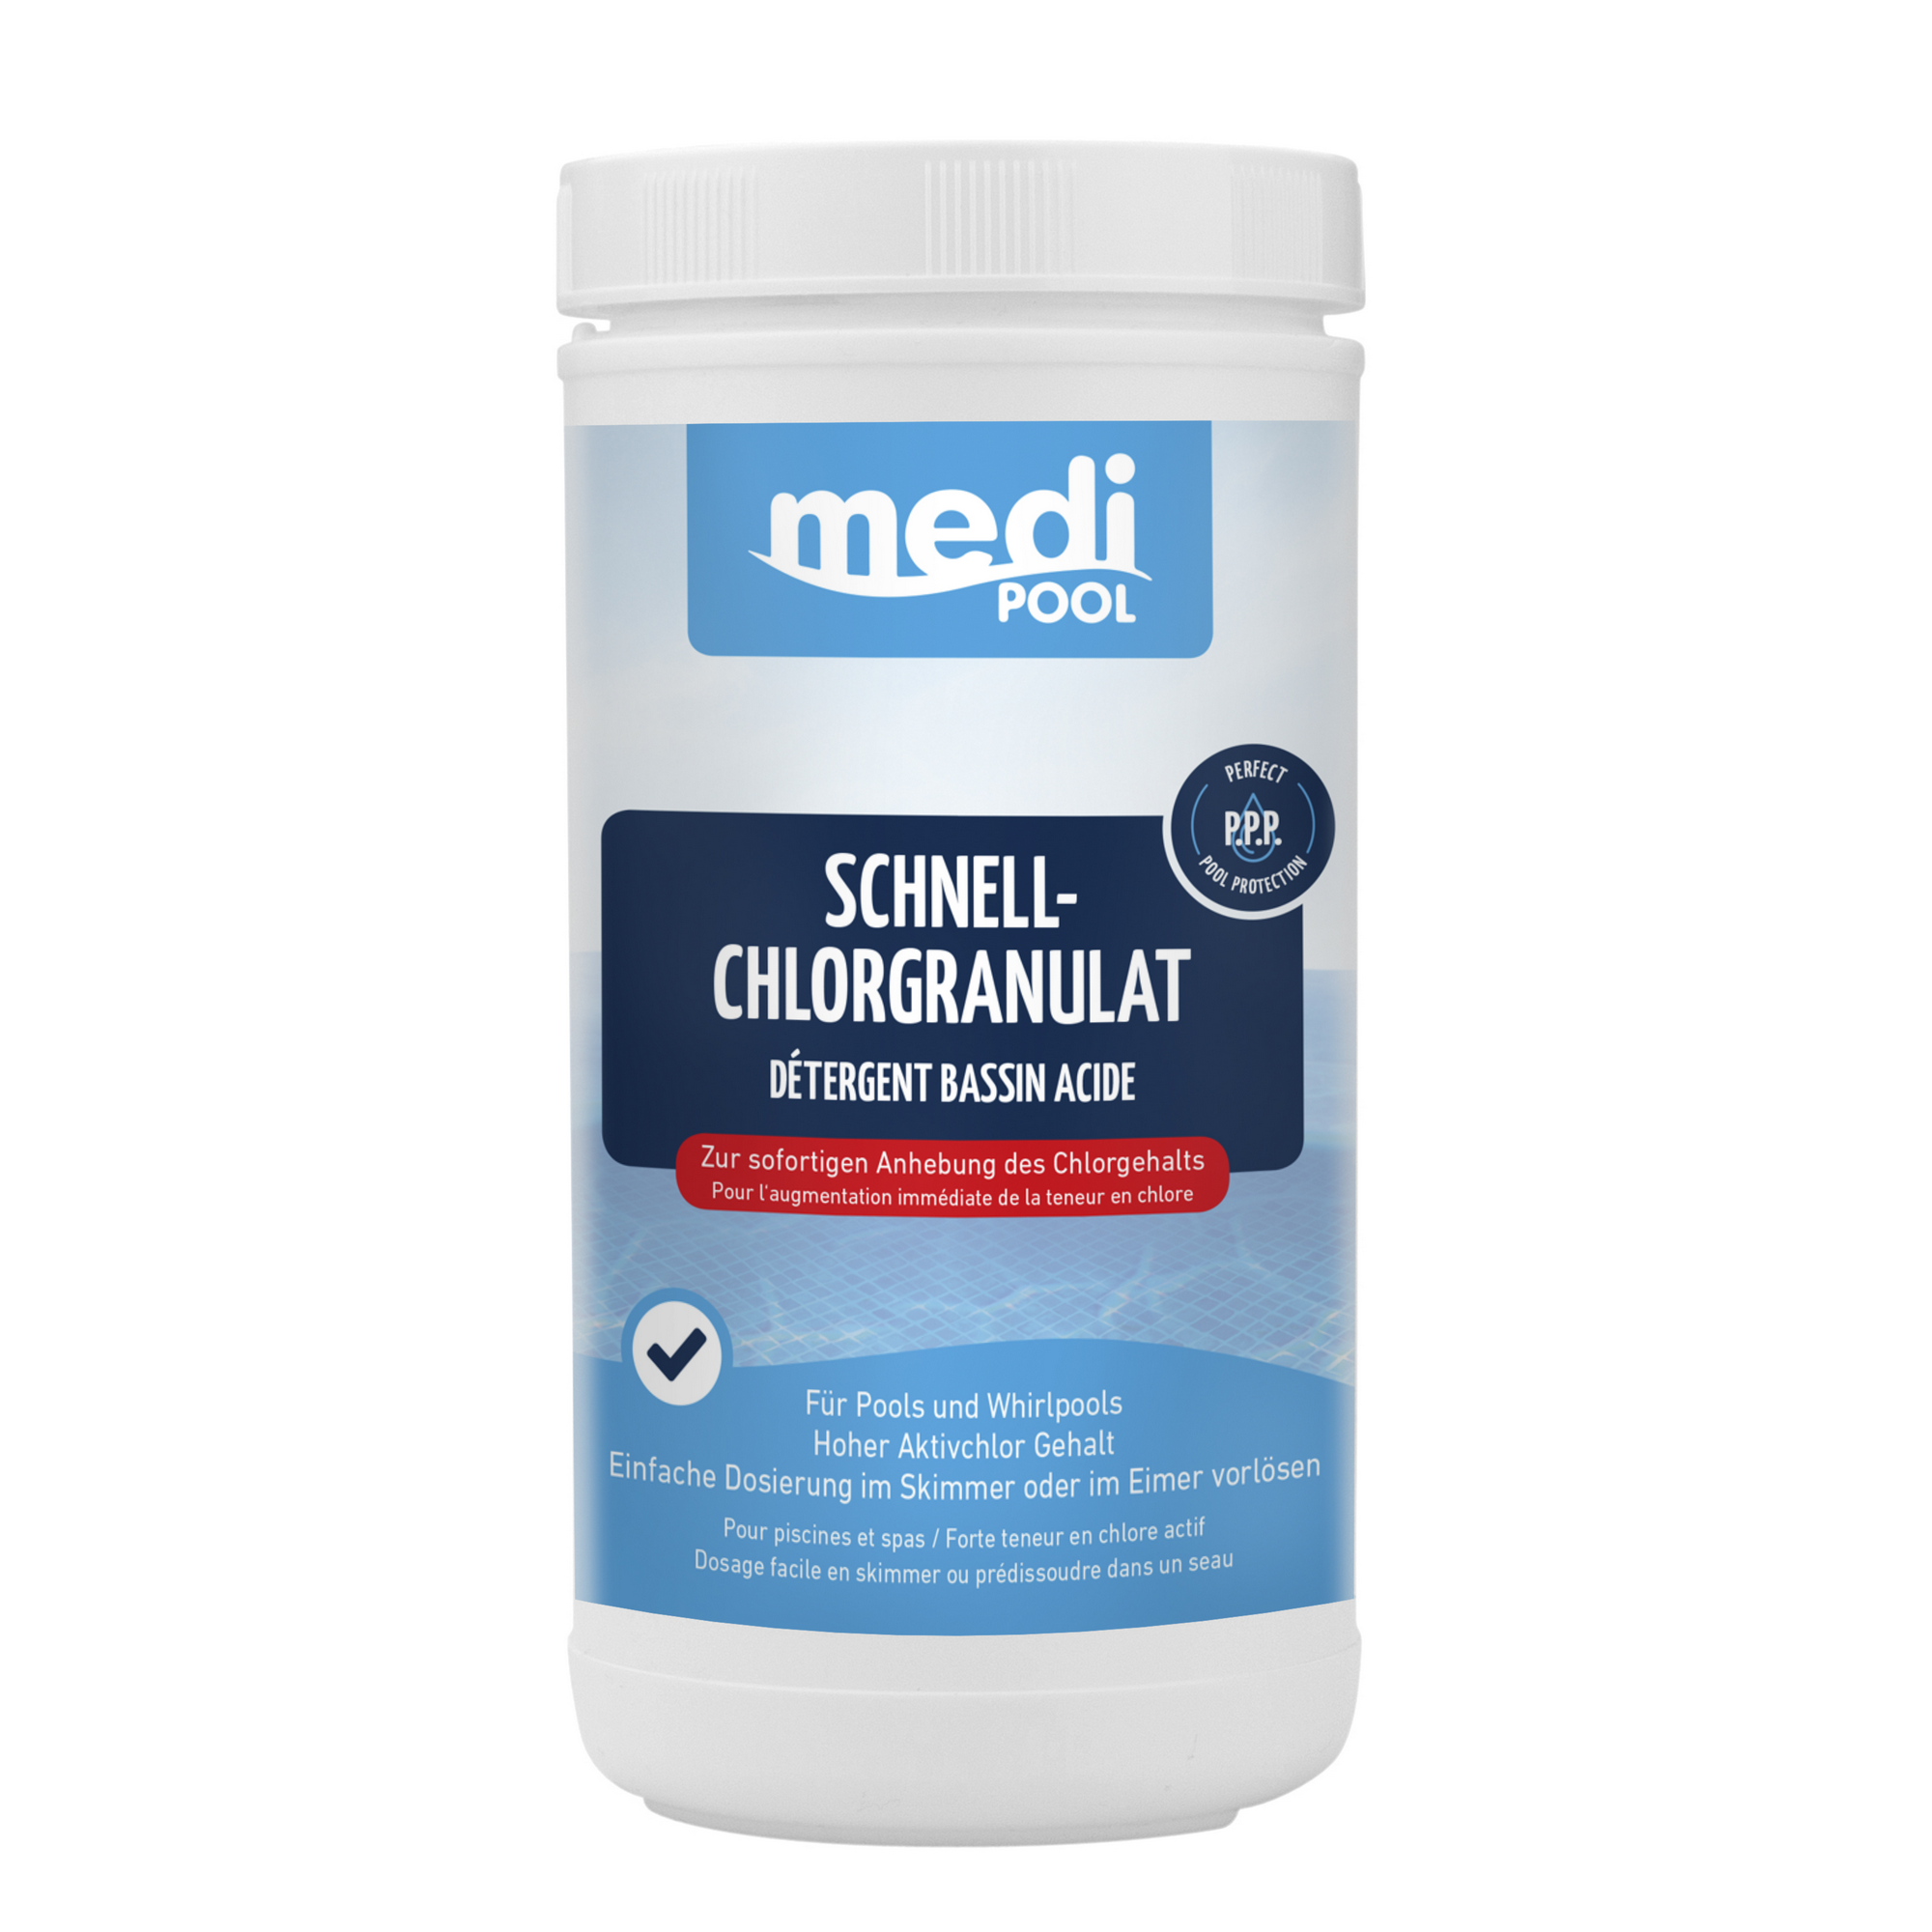 Schnell-Chlorgranulat 1 kg + product picture